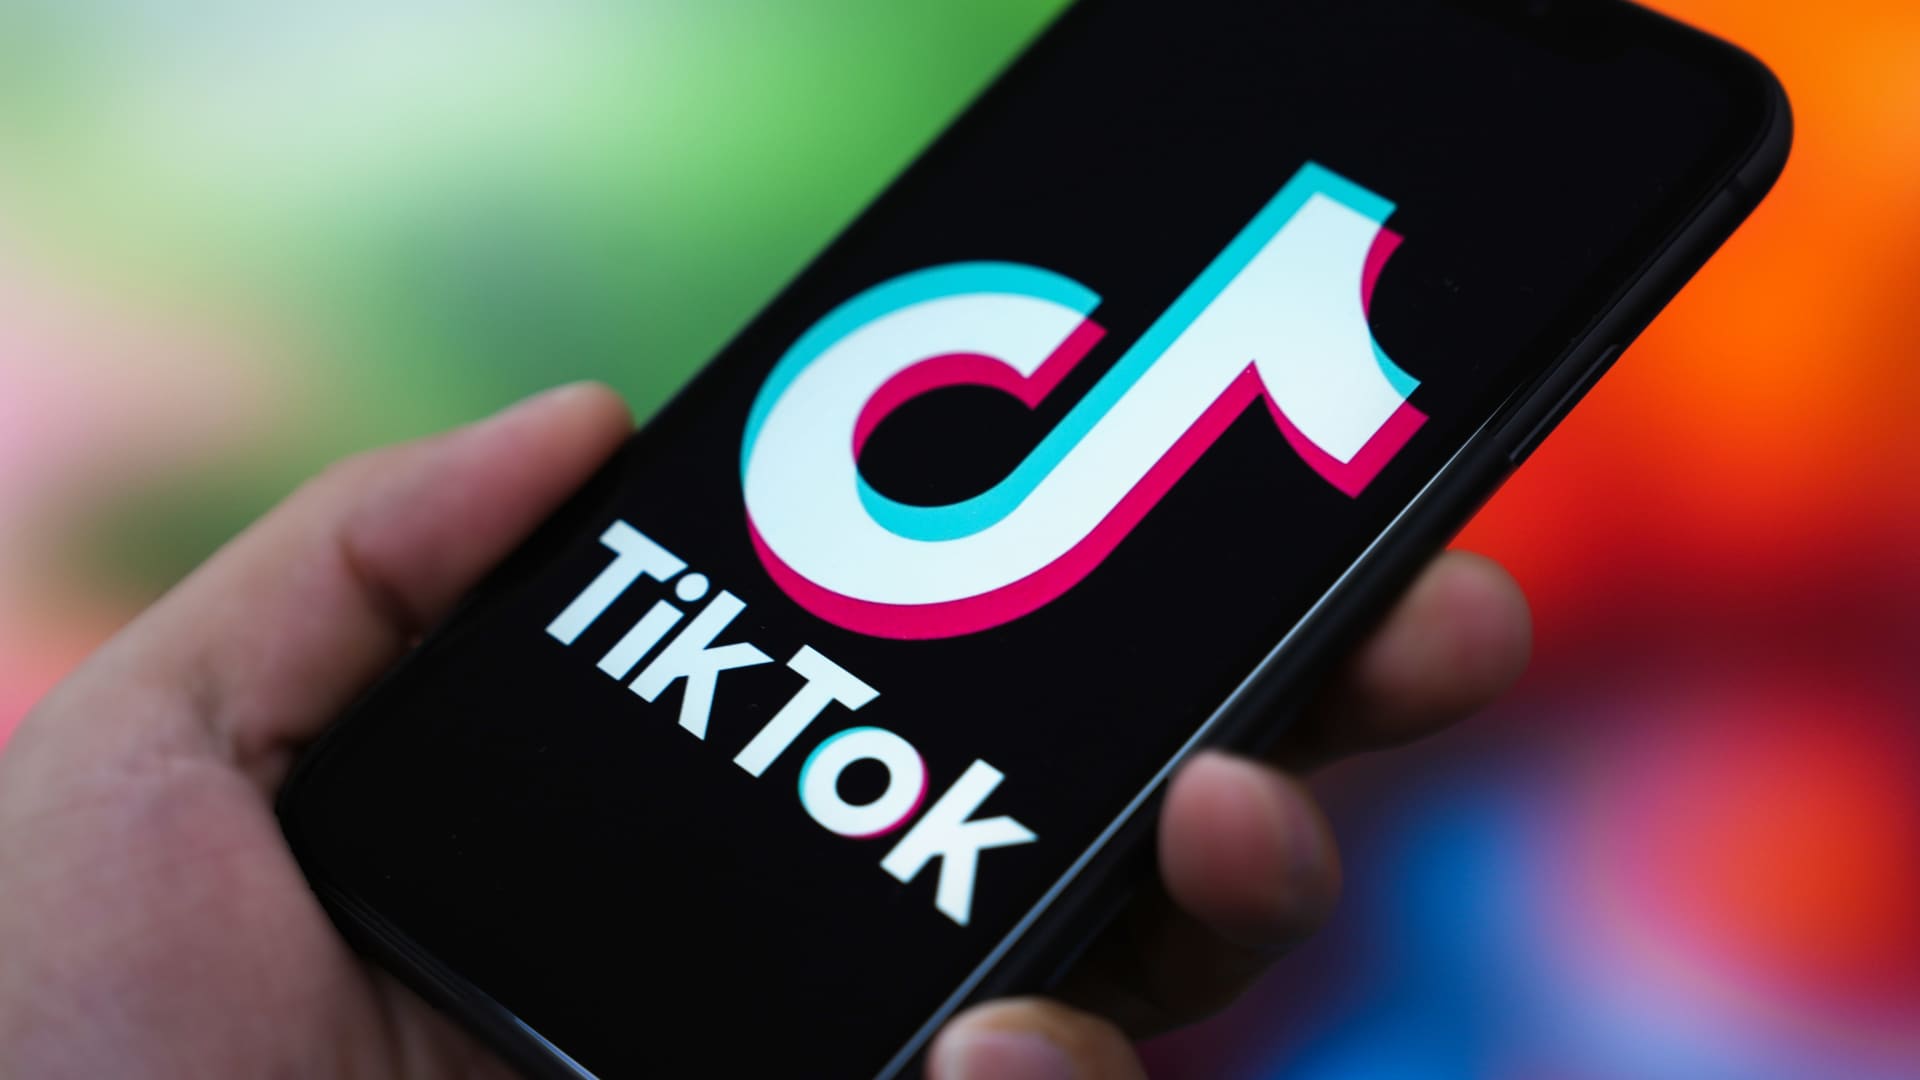 TikTok owner ByteDance offers employees buyback option at higher price to boost confidence